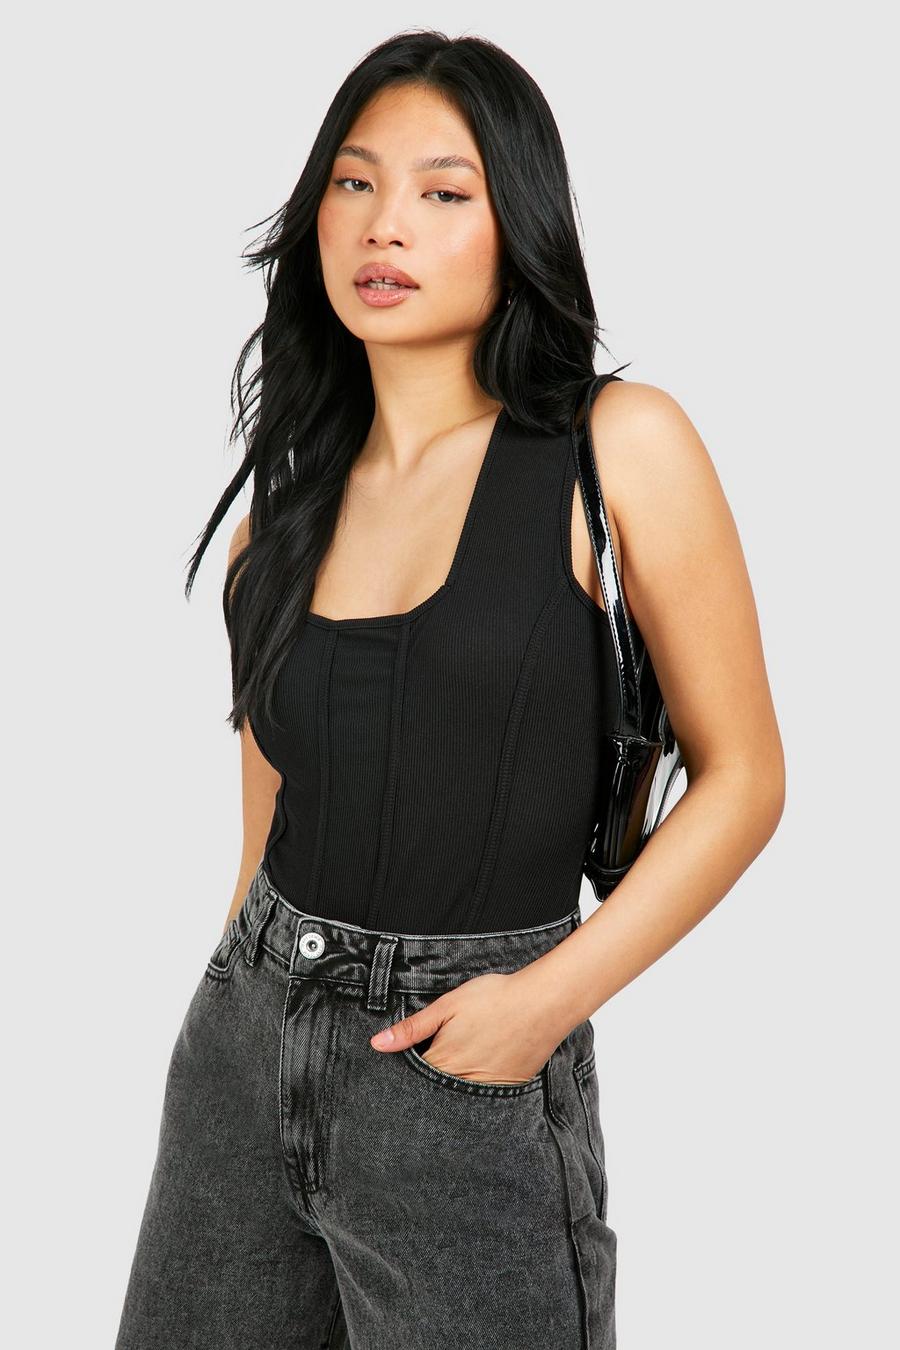 Black Sport set consisting of a t-shirt and dungarees